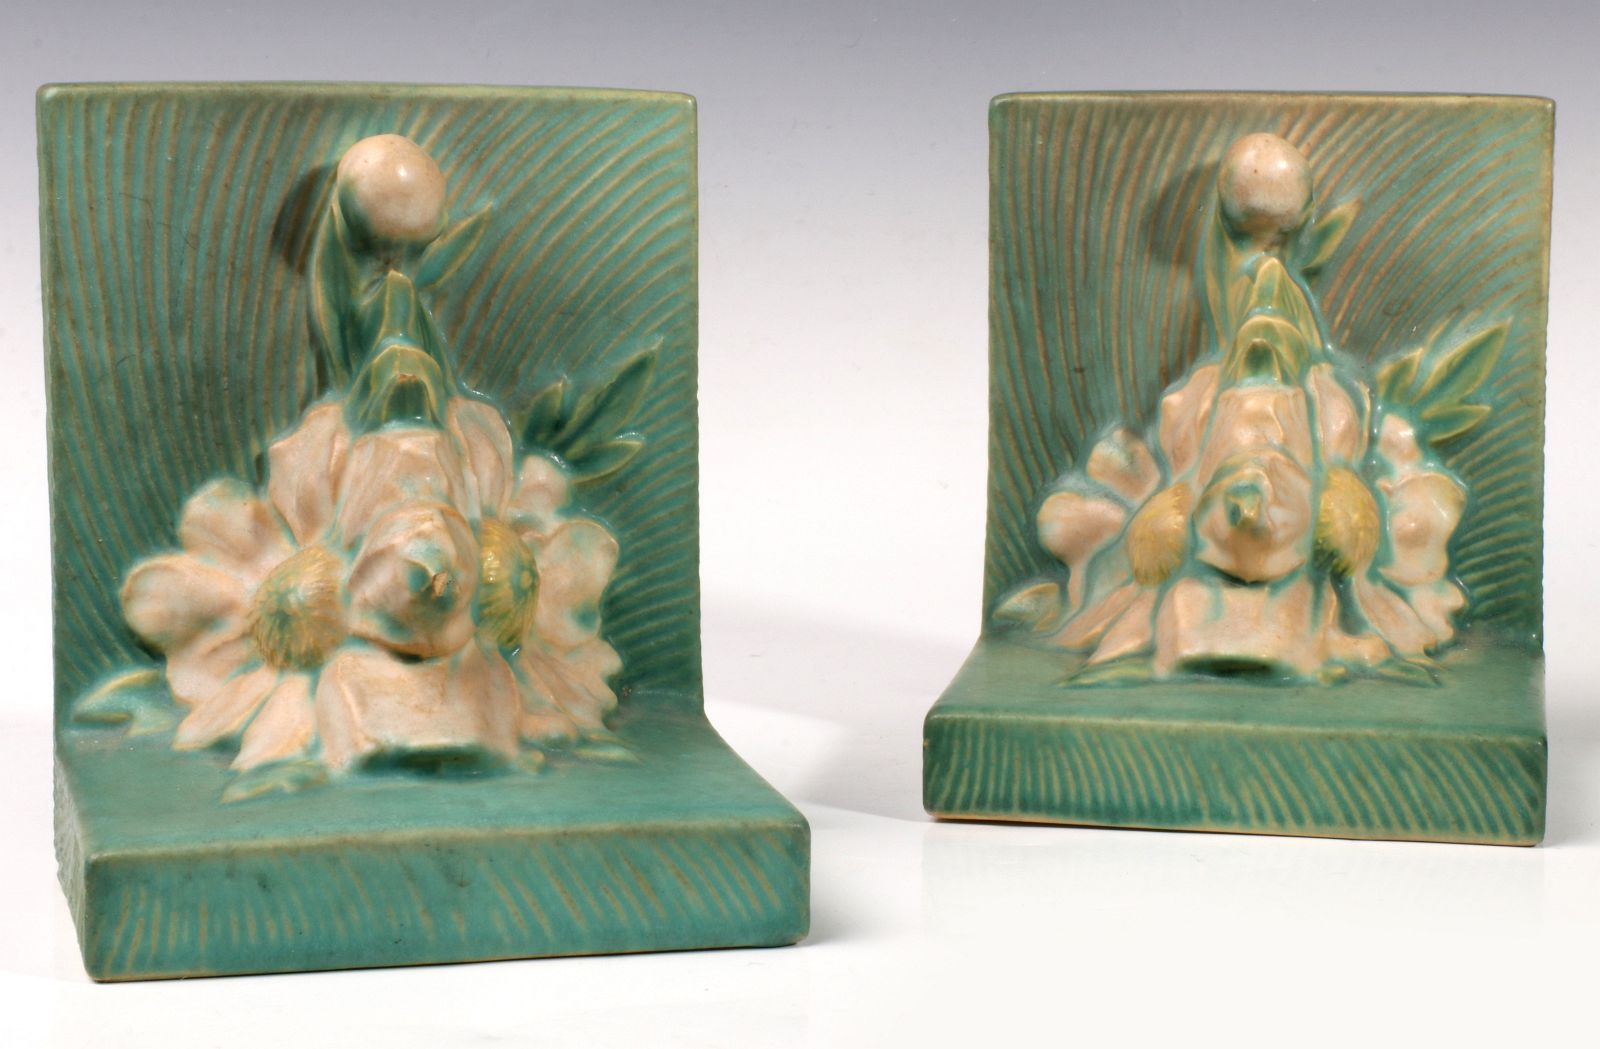 A PAIR OF ROSEVILLE 'PEONY' ART POTTERY BOOKENDS